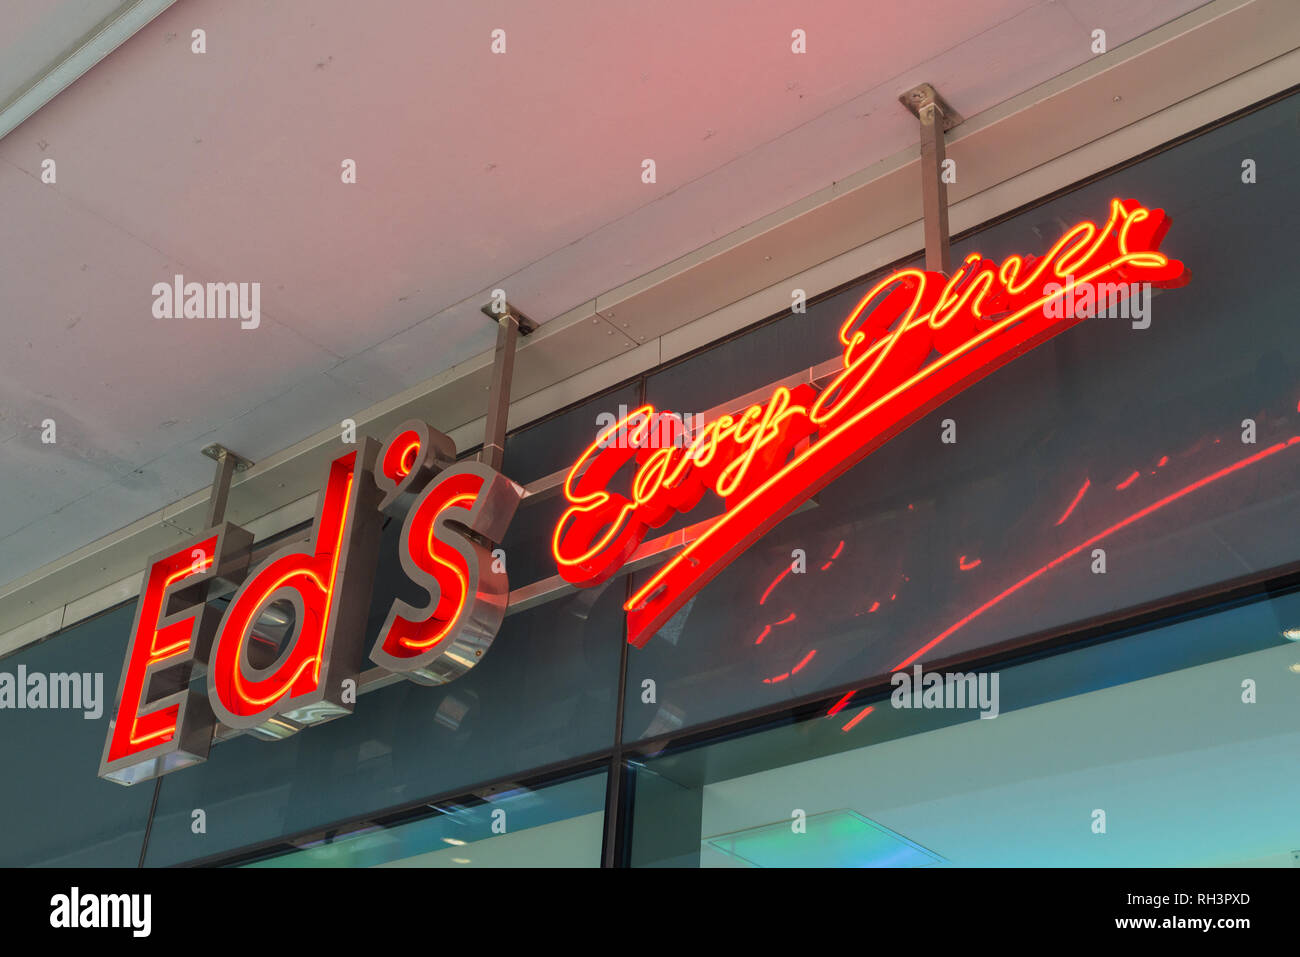 Neon sign for Ed's Easy Diner Stock Photo